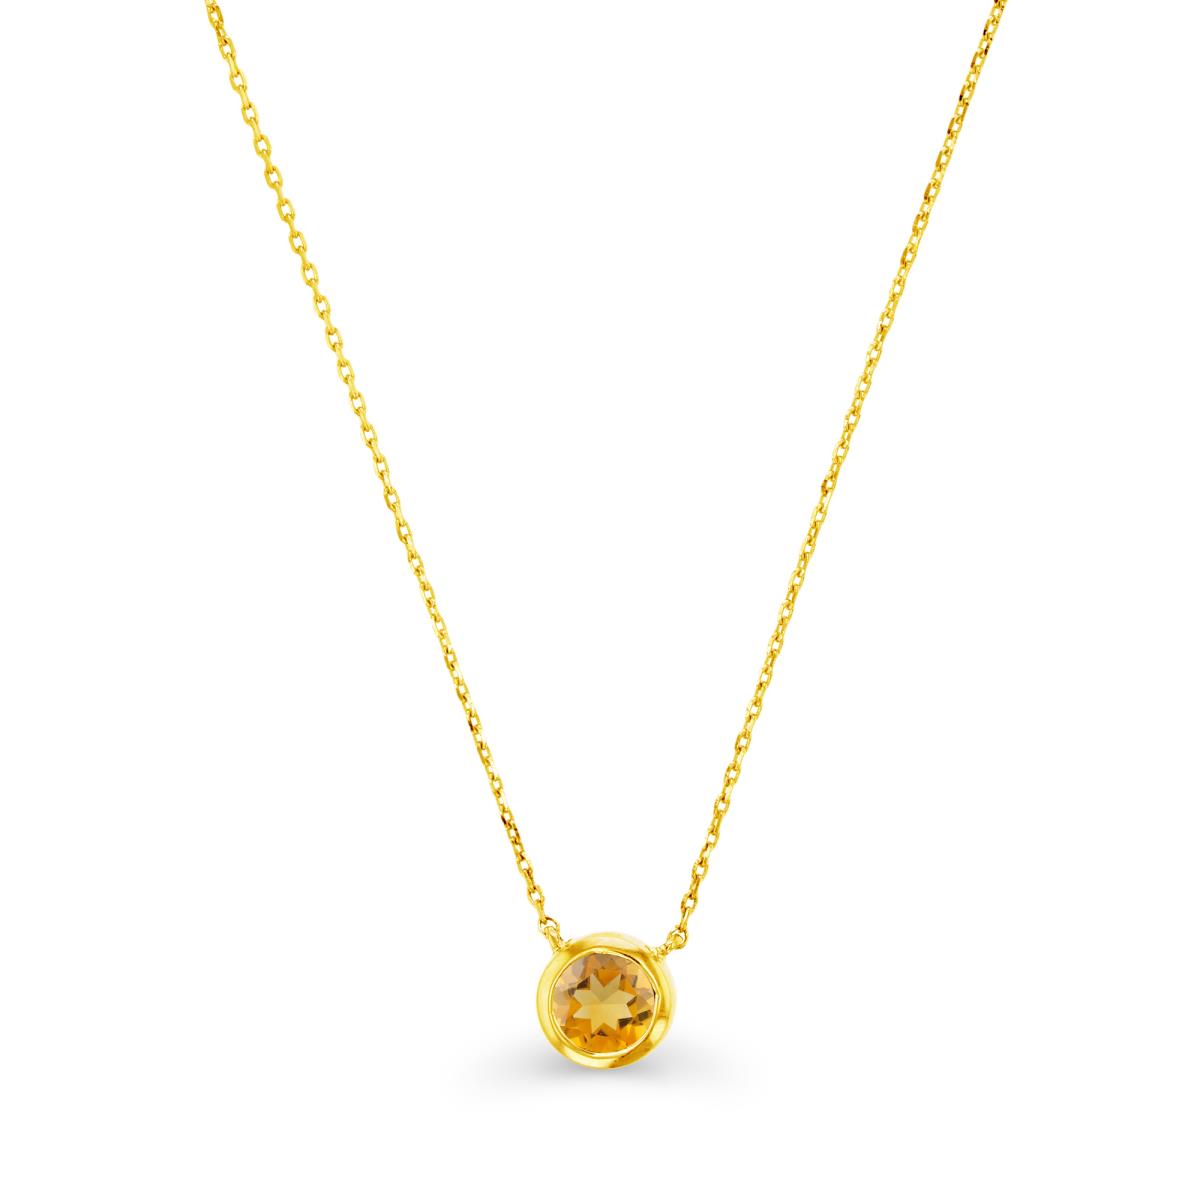 10K Yellow Gold & 5mm Rd Citrine Set Necklace